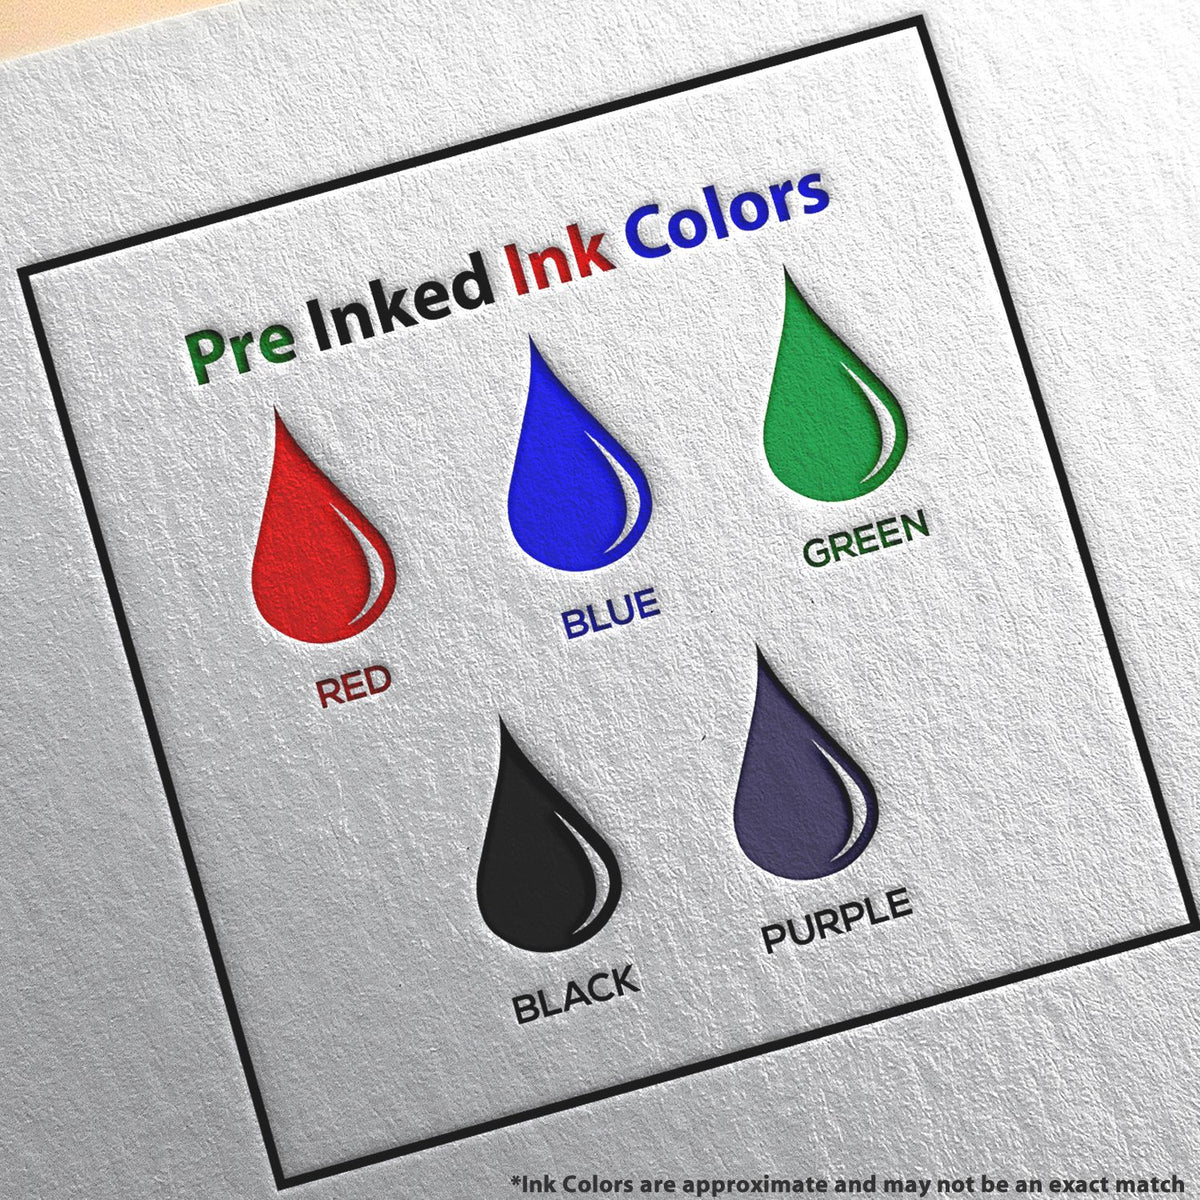 A picture showing the different ink colors or hues available for the MaxLight Premium Pre-Inked Vermont State Seal Notarial Stamp product.